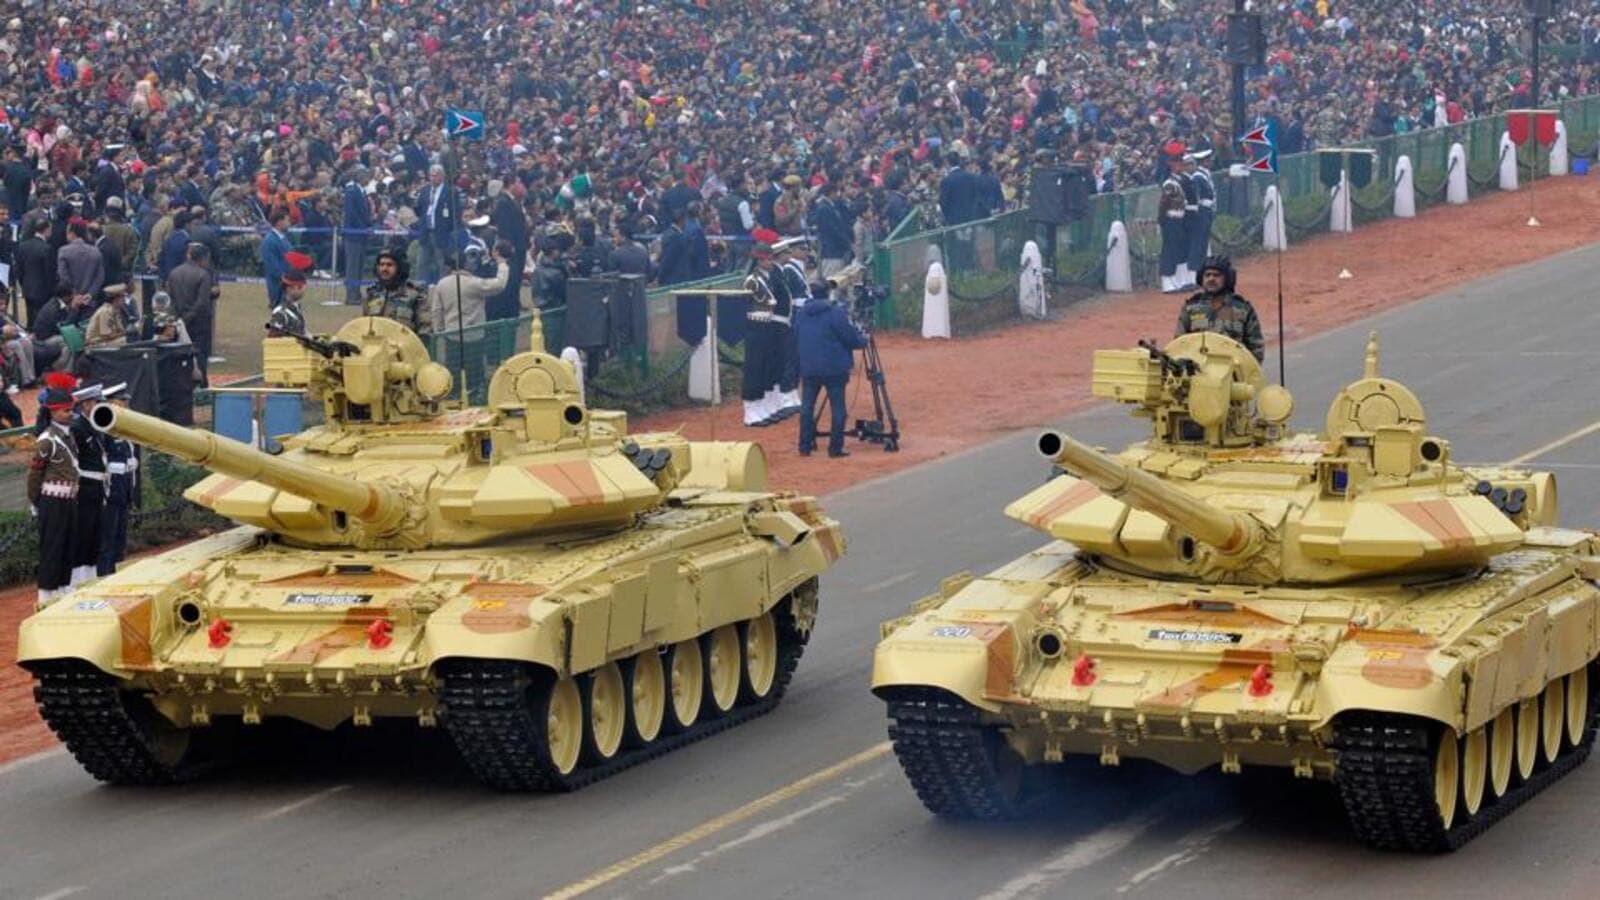 Russia's Stalled Arms Sales: Ukraine War Scares Off India, a Top Buyer